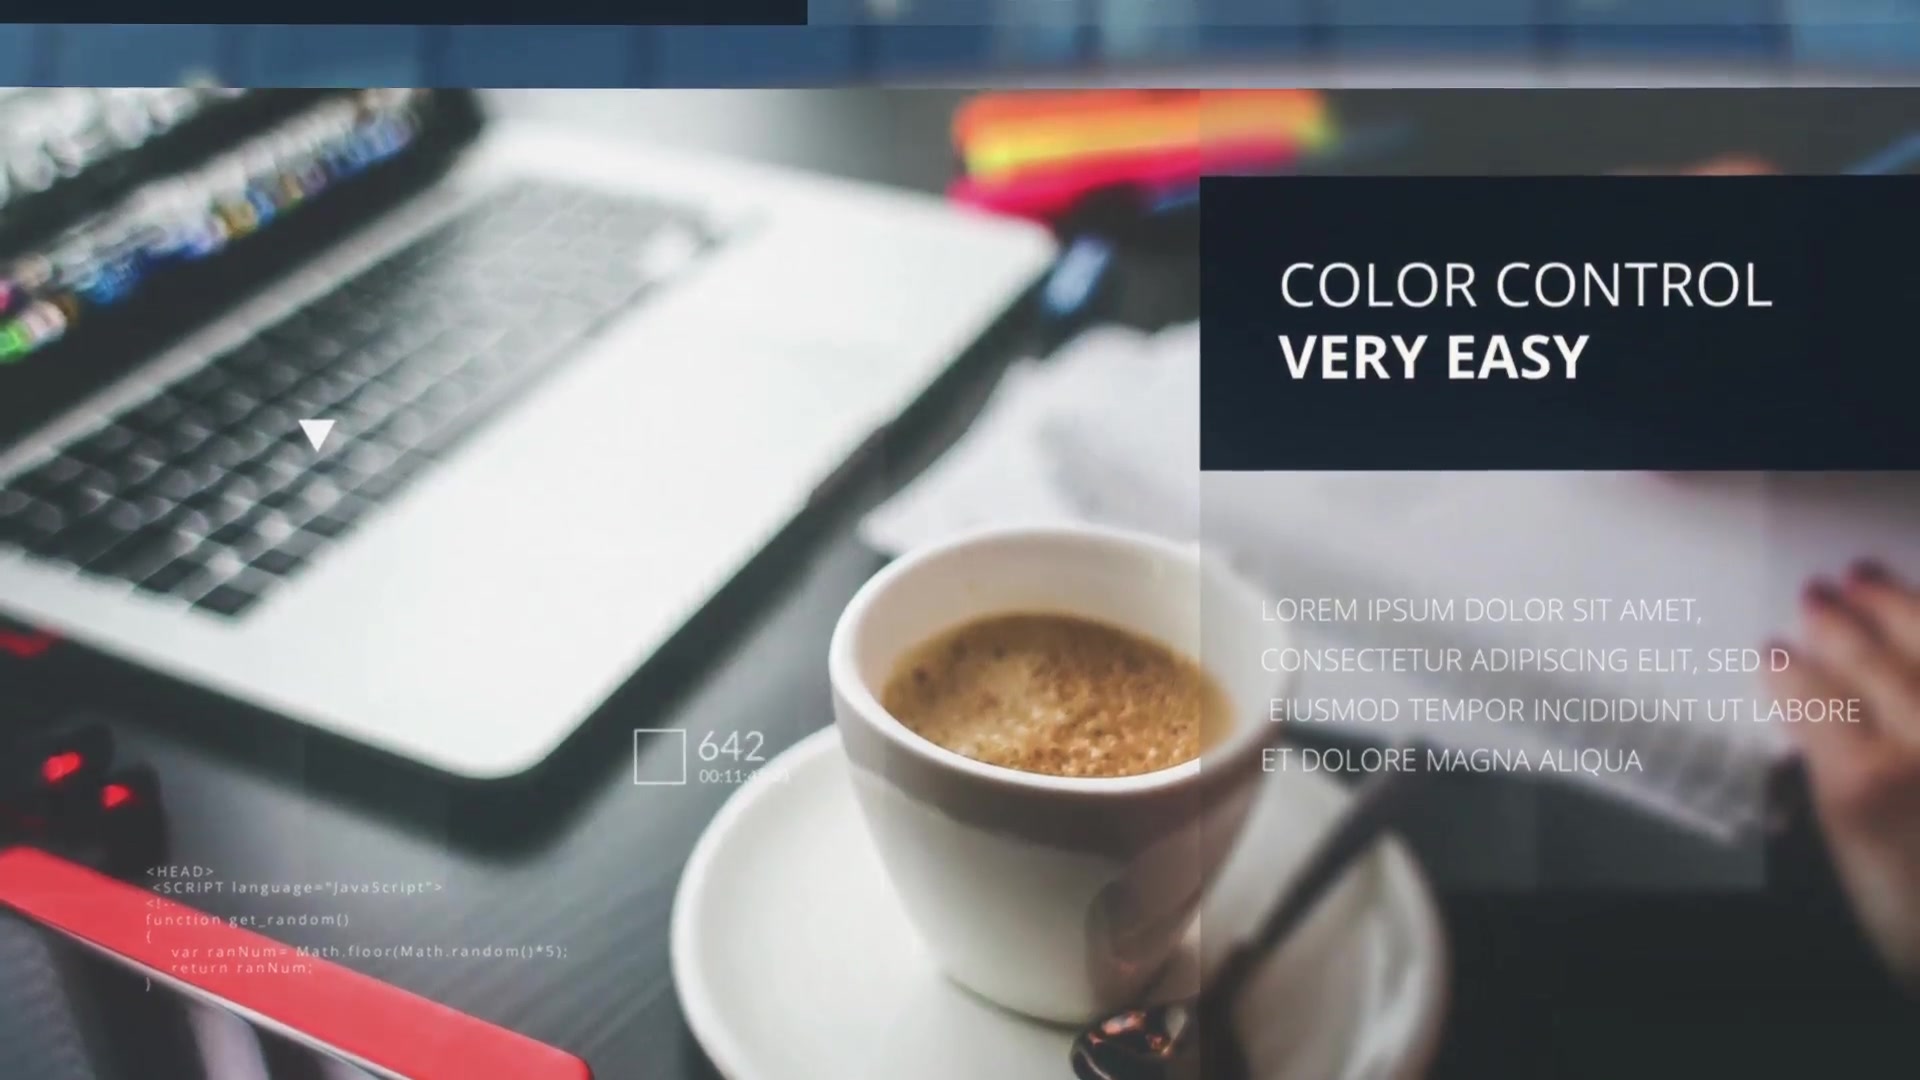 Clean Glass Corporate Slideshow - Download Videohive 19365006